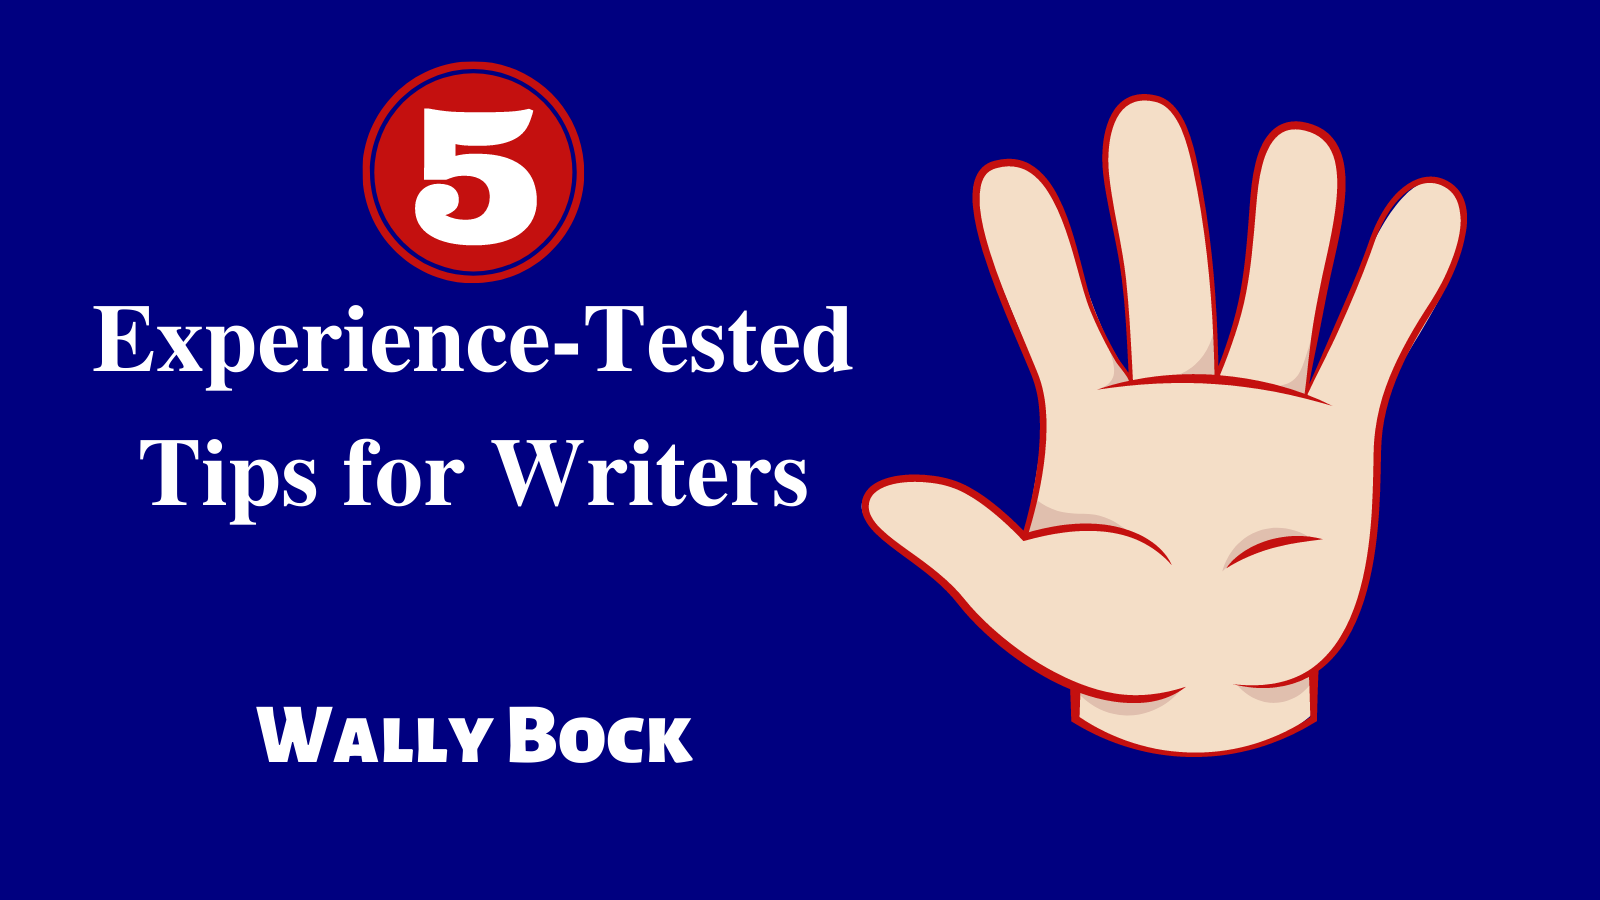 5 Experience-Tested Tips for Writers